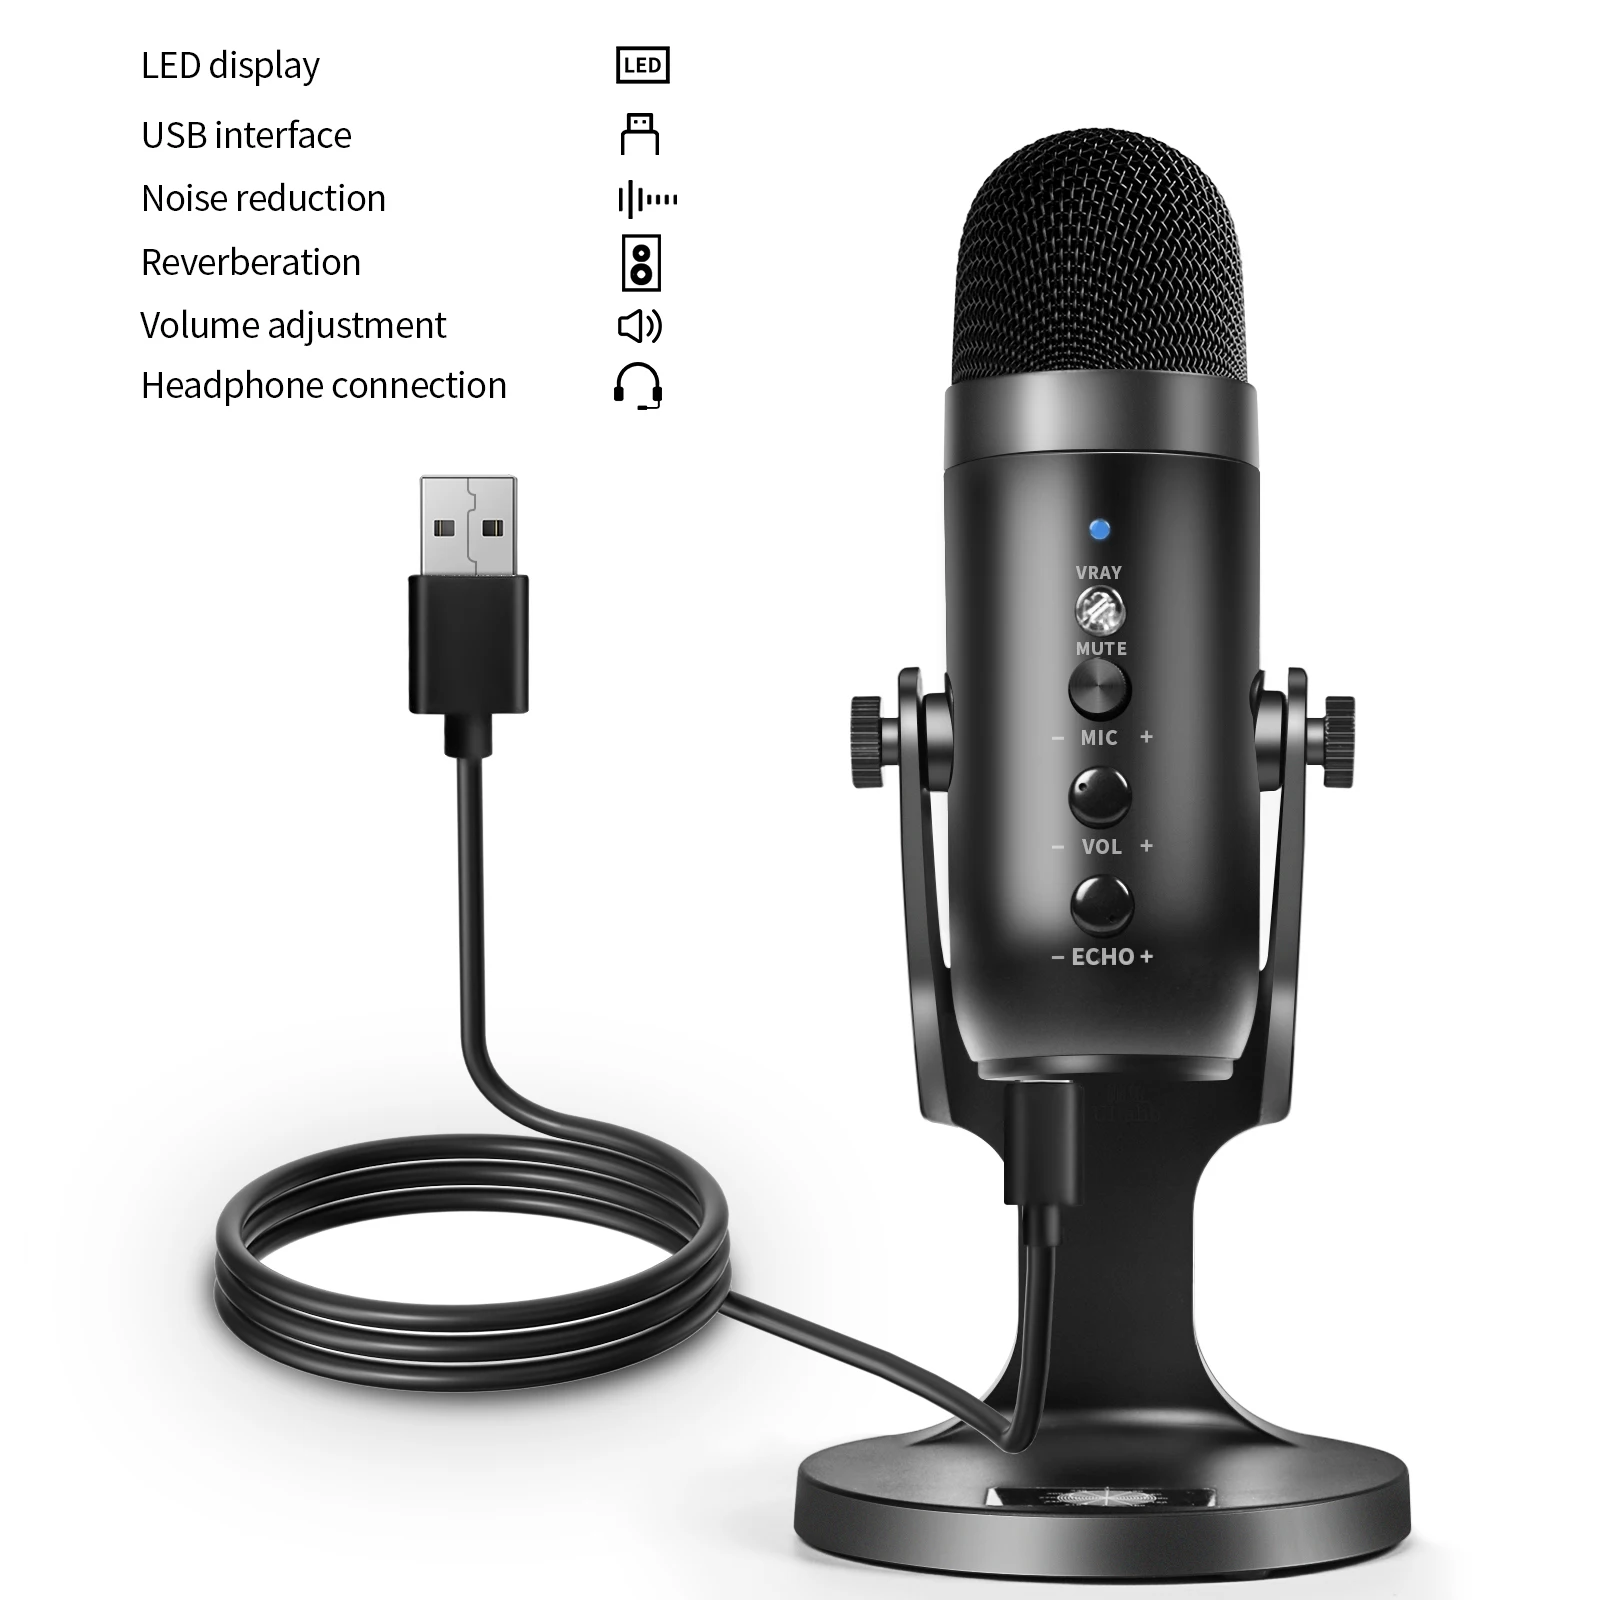 headset with mic Kinglucky usb condenser microphone game professional computer Bluetooth speaker subwoofer support media podcast recording best microphone for streaming